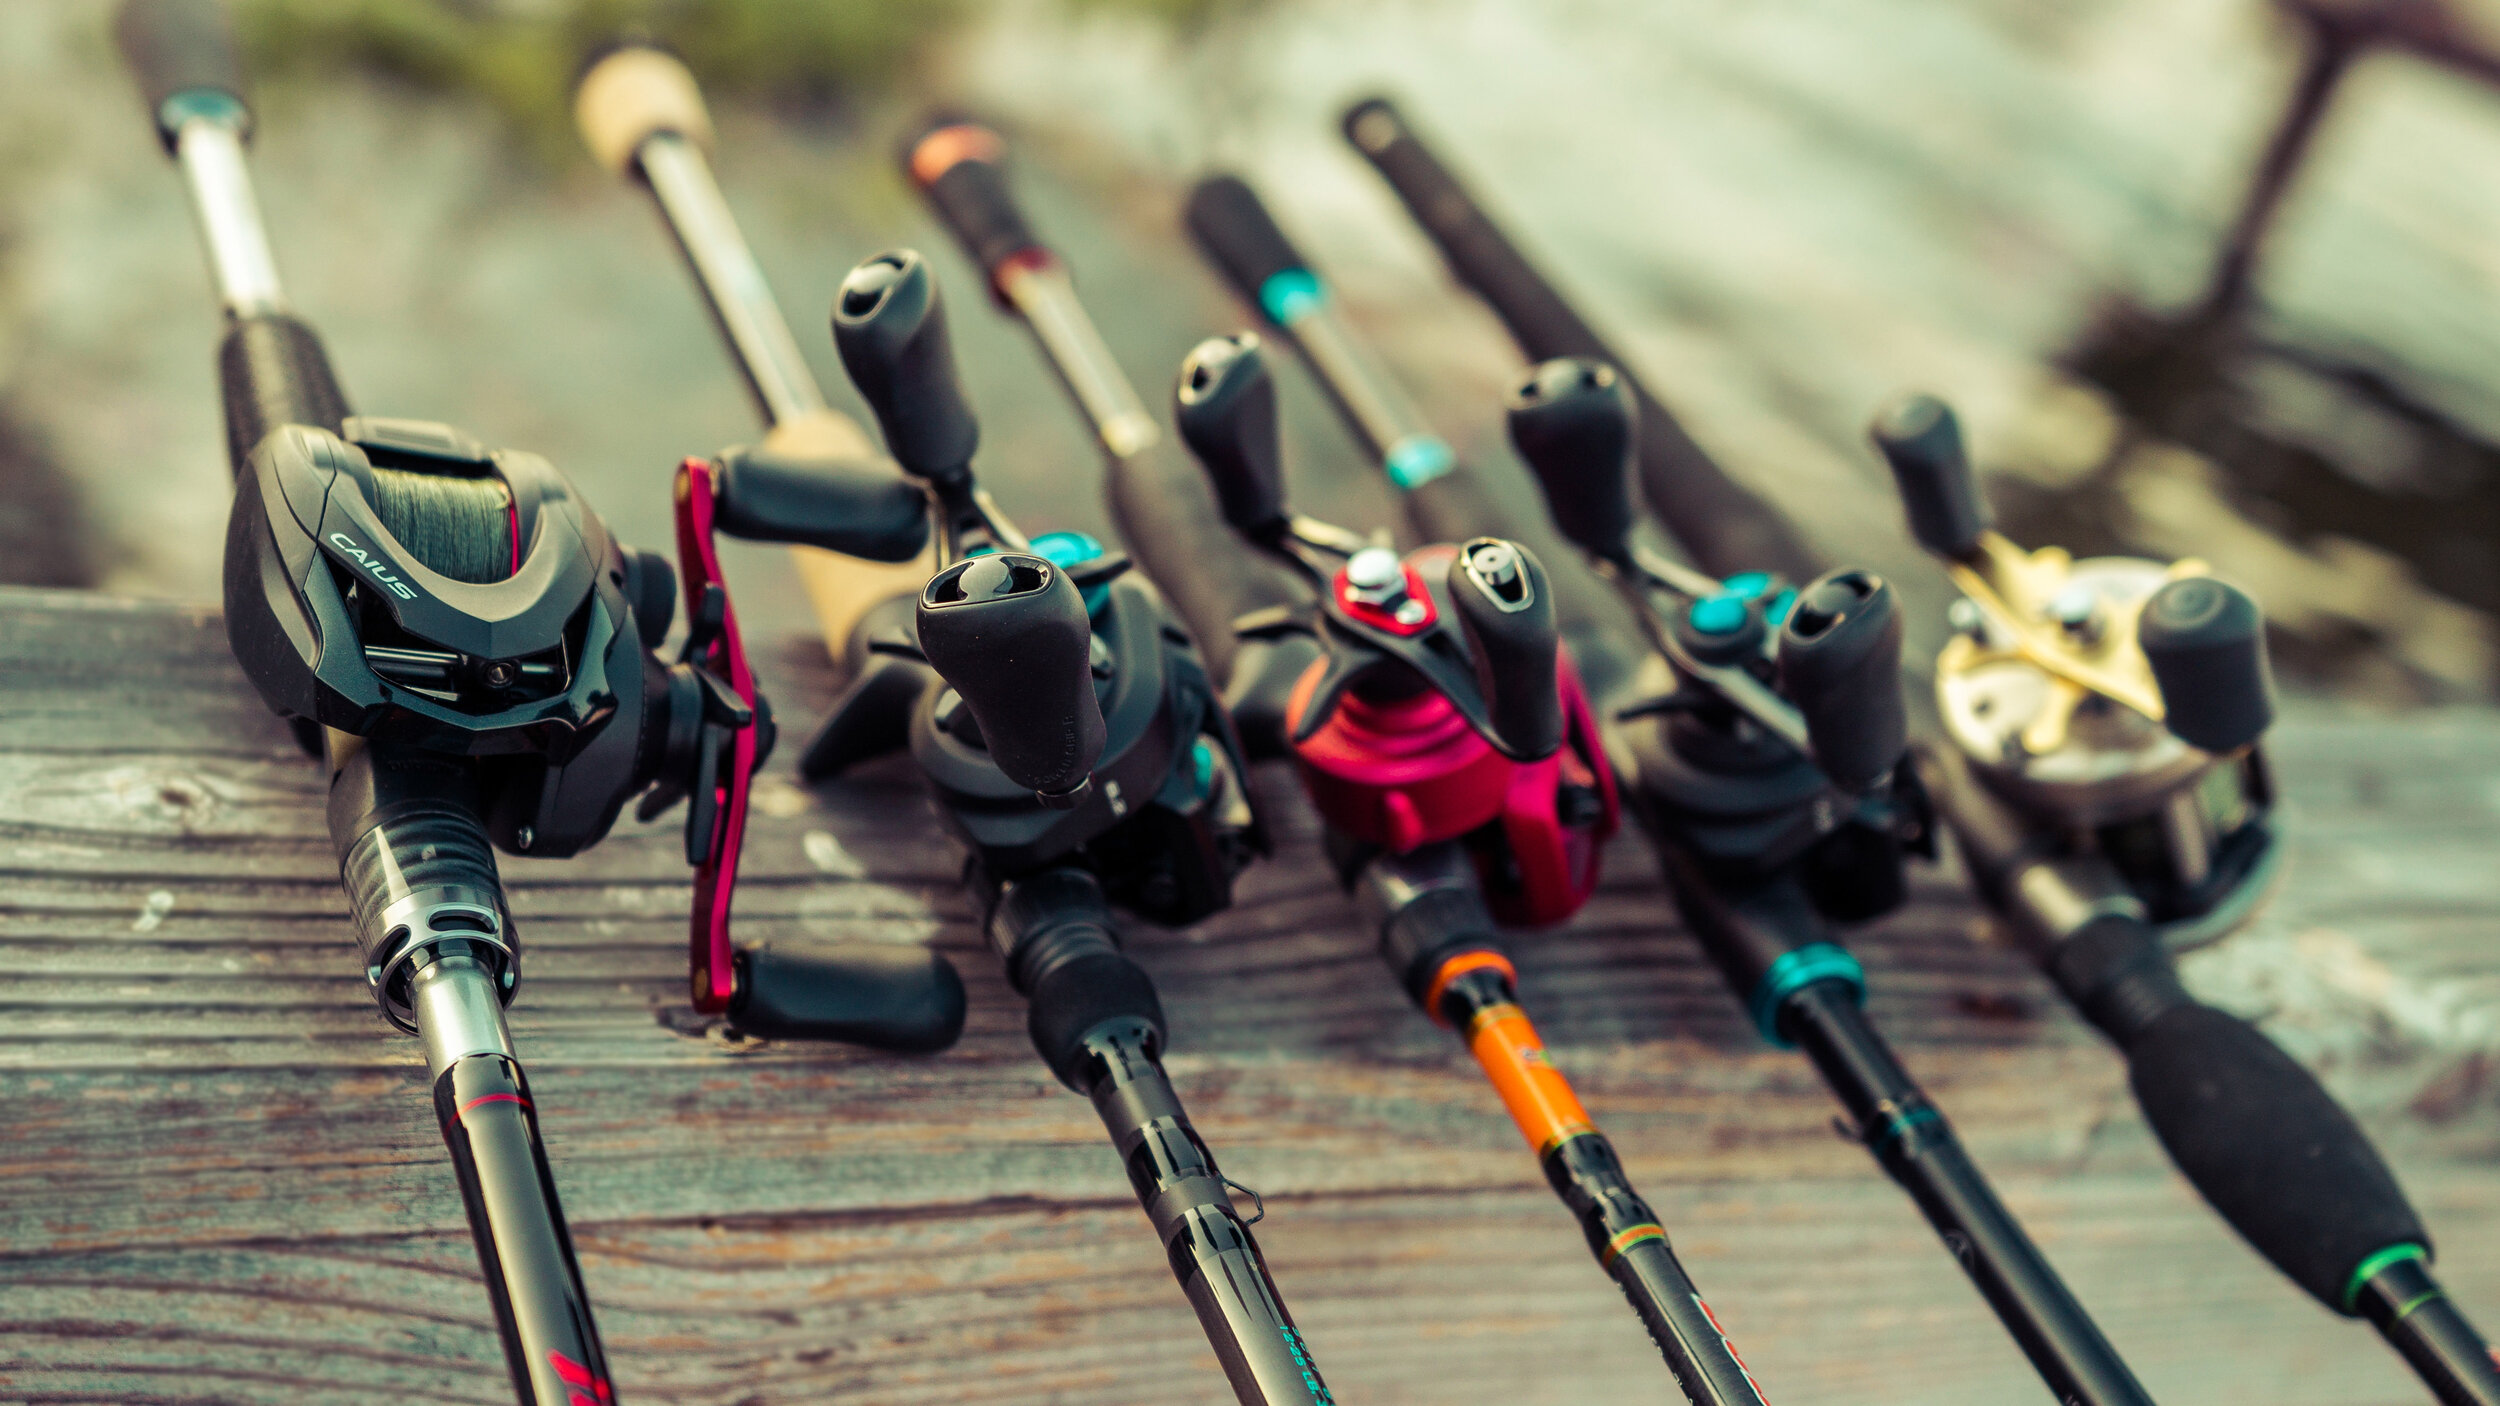 Buyer's Guide: Best Casting Rod and Reel Combos Under $200